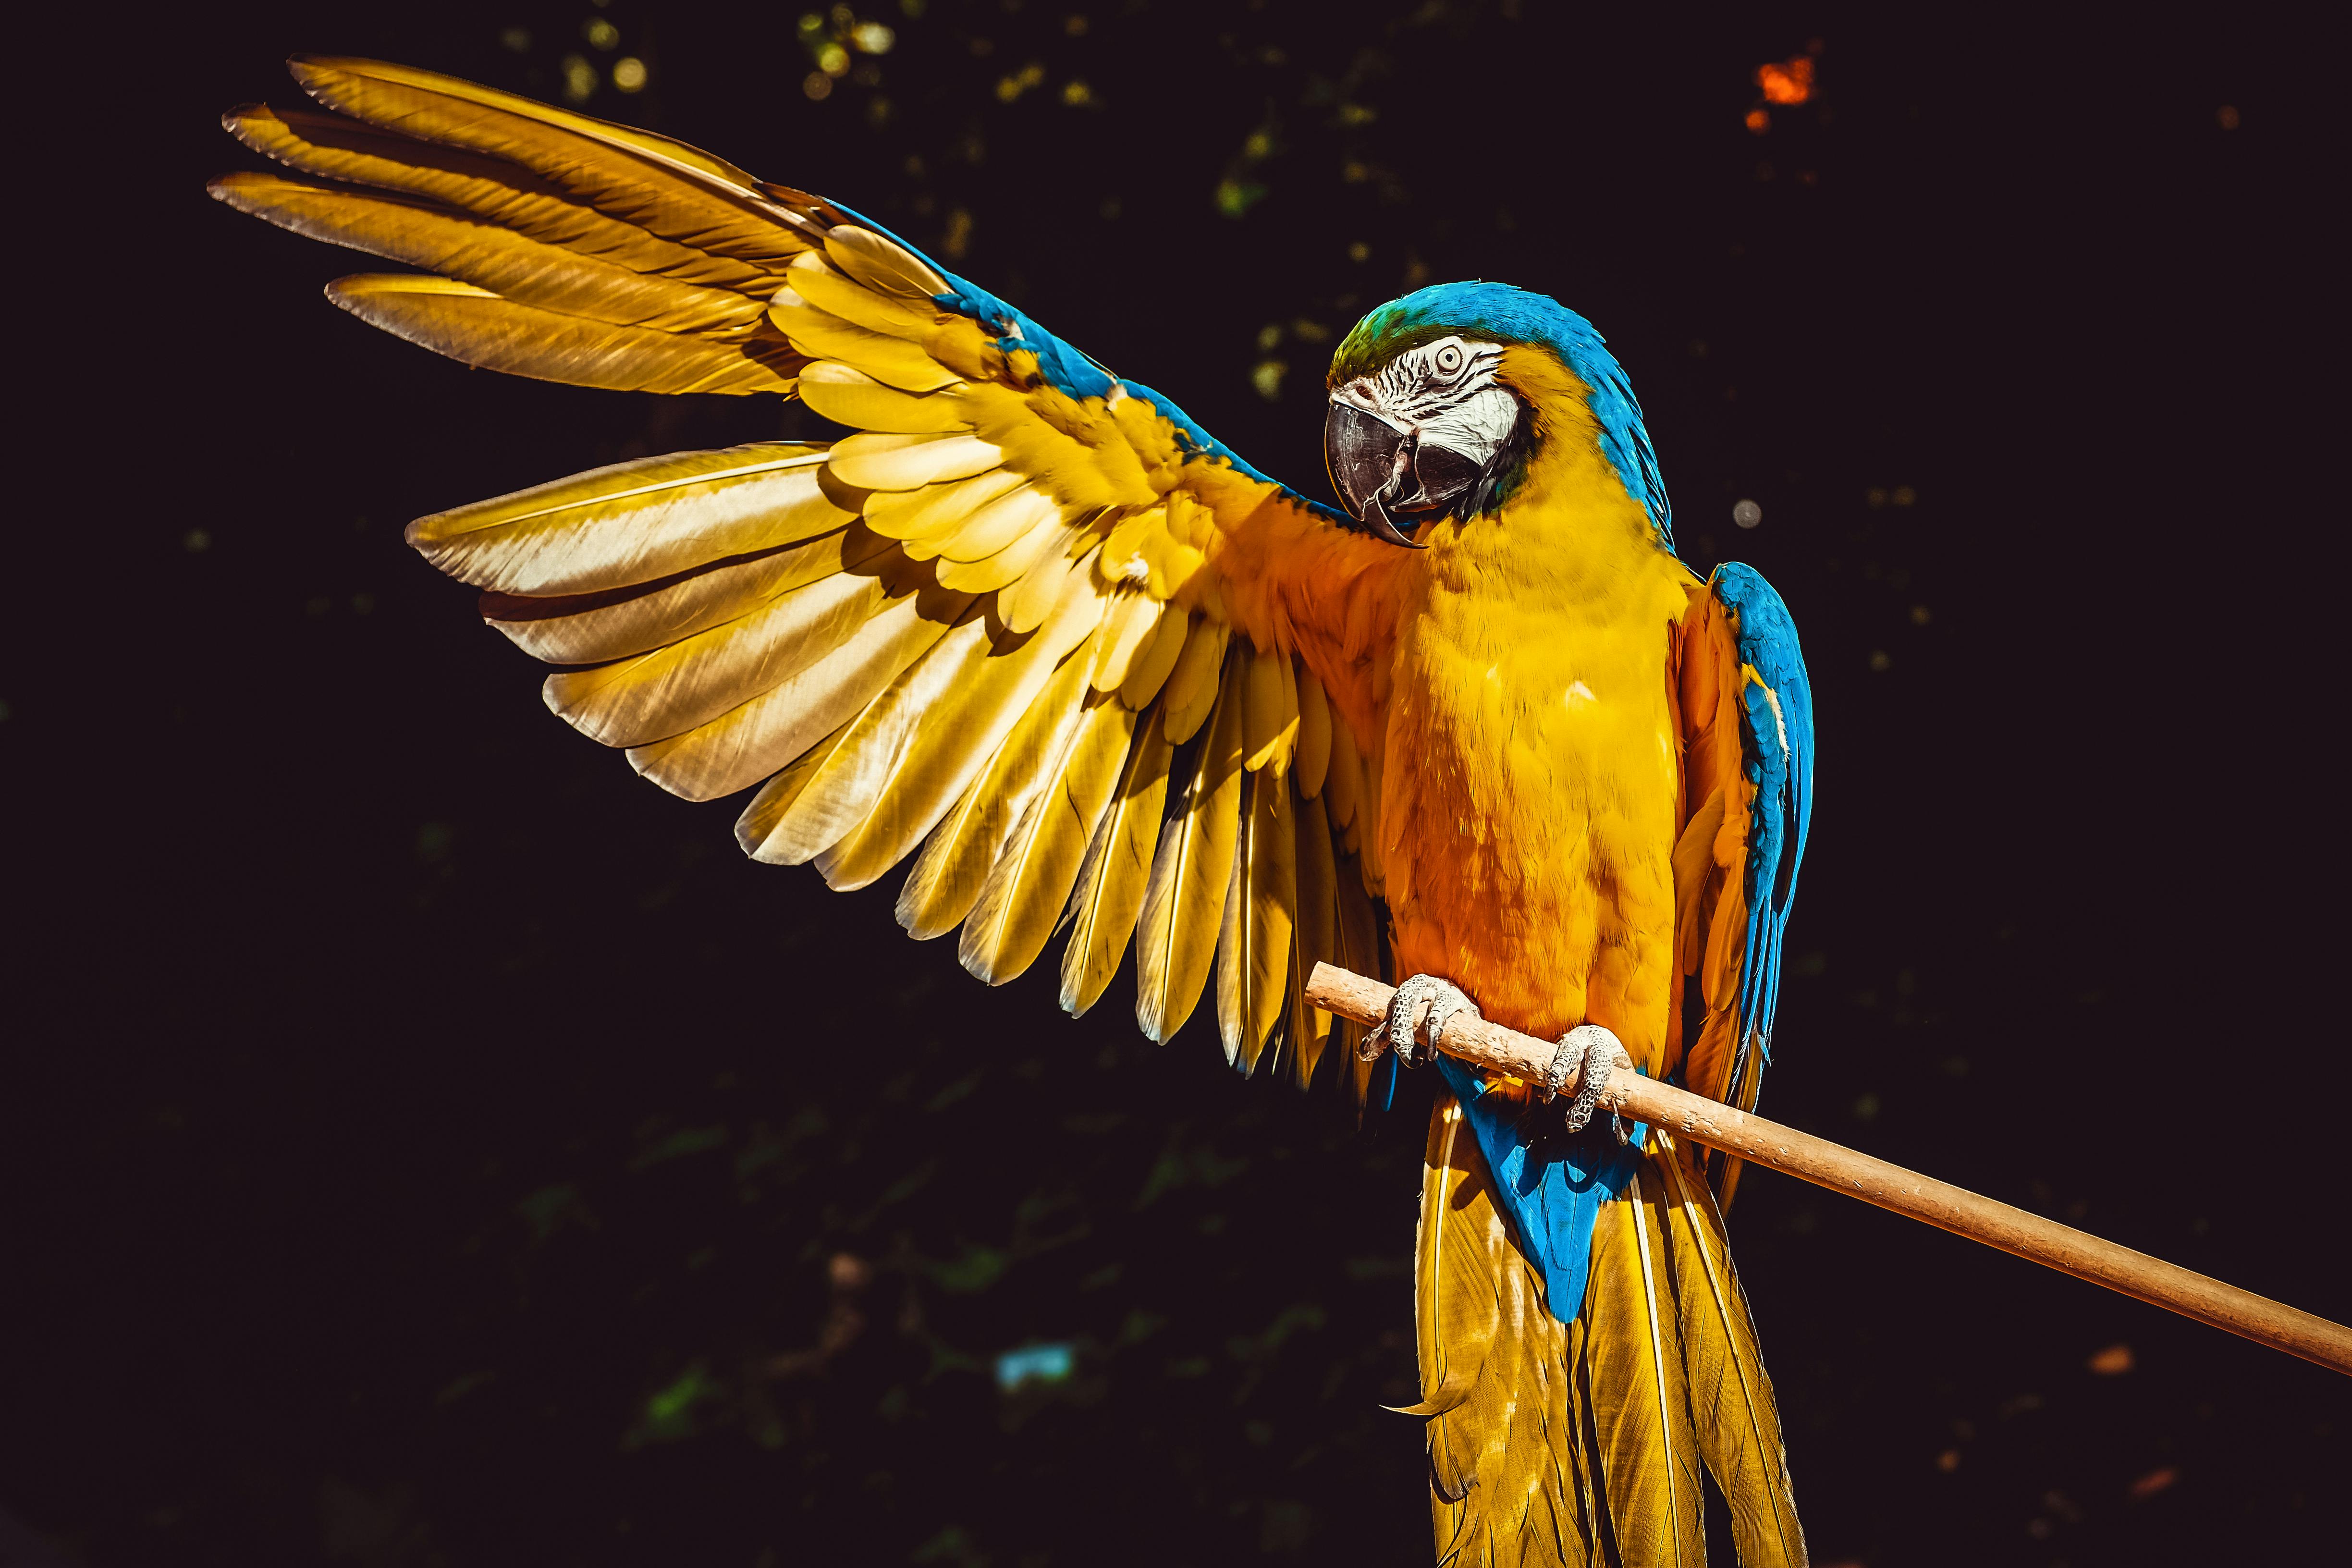 Photo of Yellow and Blue Macaw With One Wing Open Perched on a Wooden ...